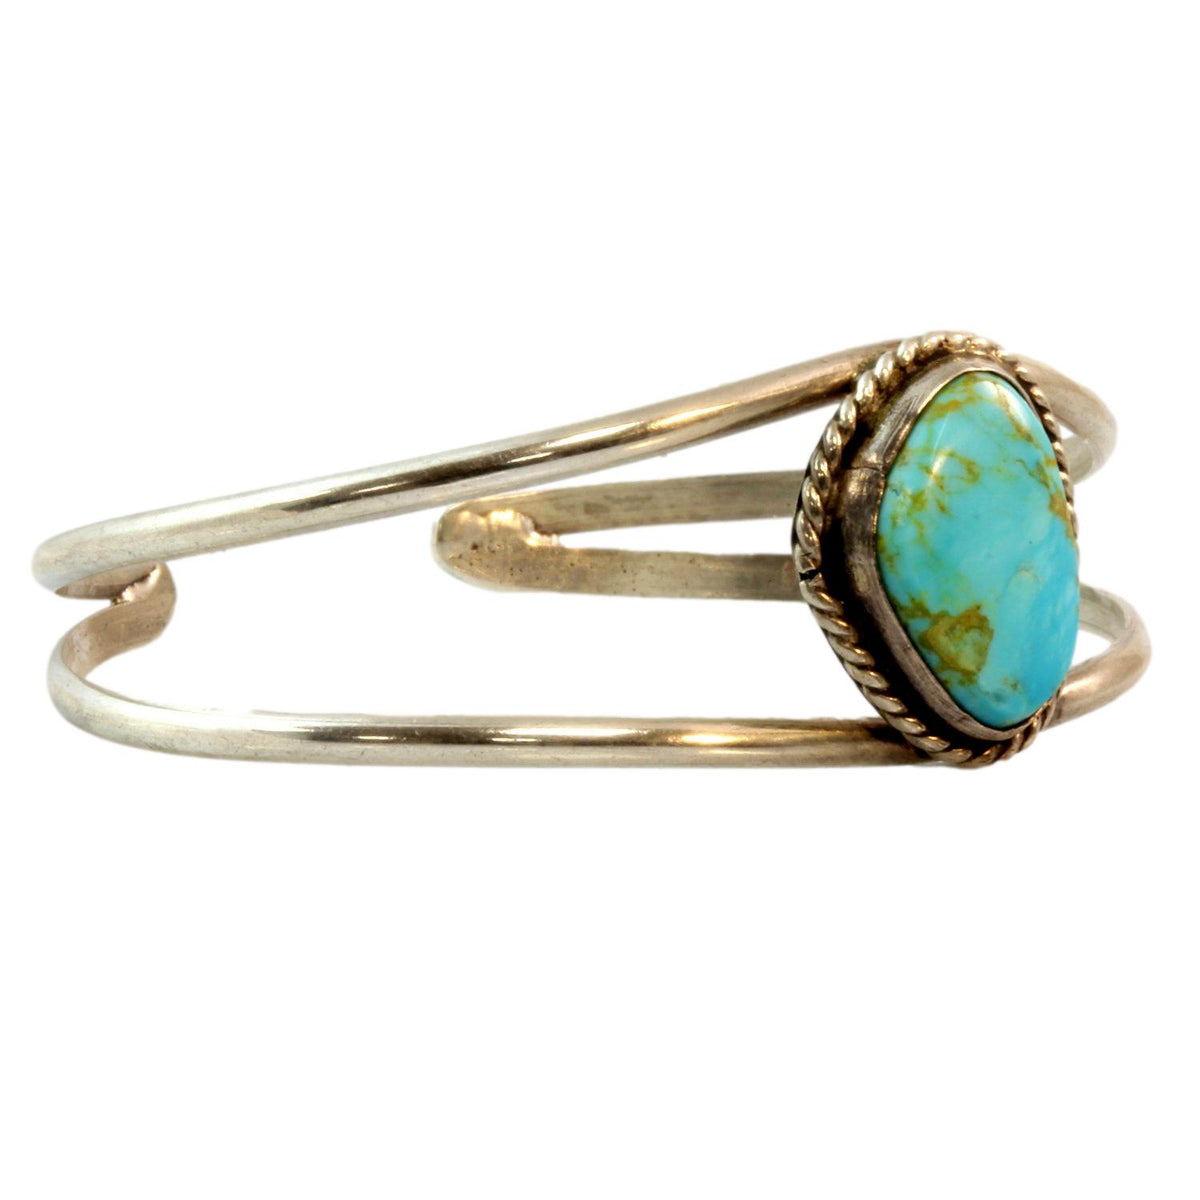 Vintage Child's Turquoise Sterling Silver Cuff Bracelet